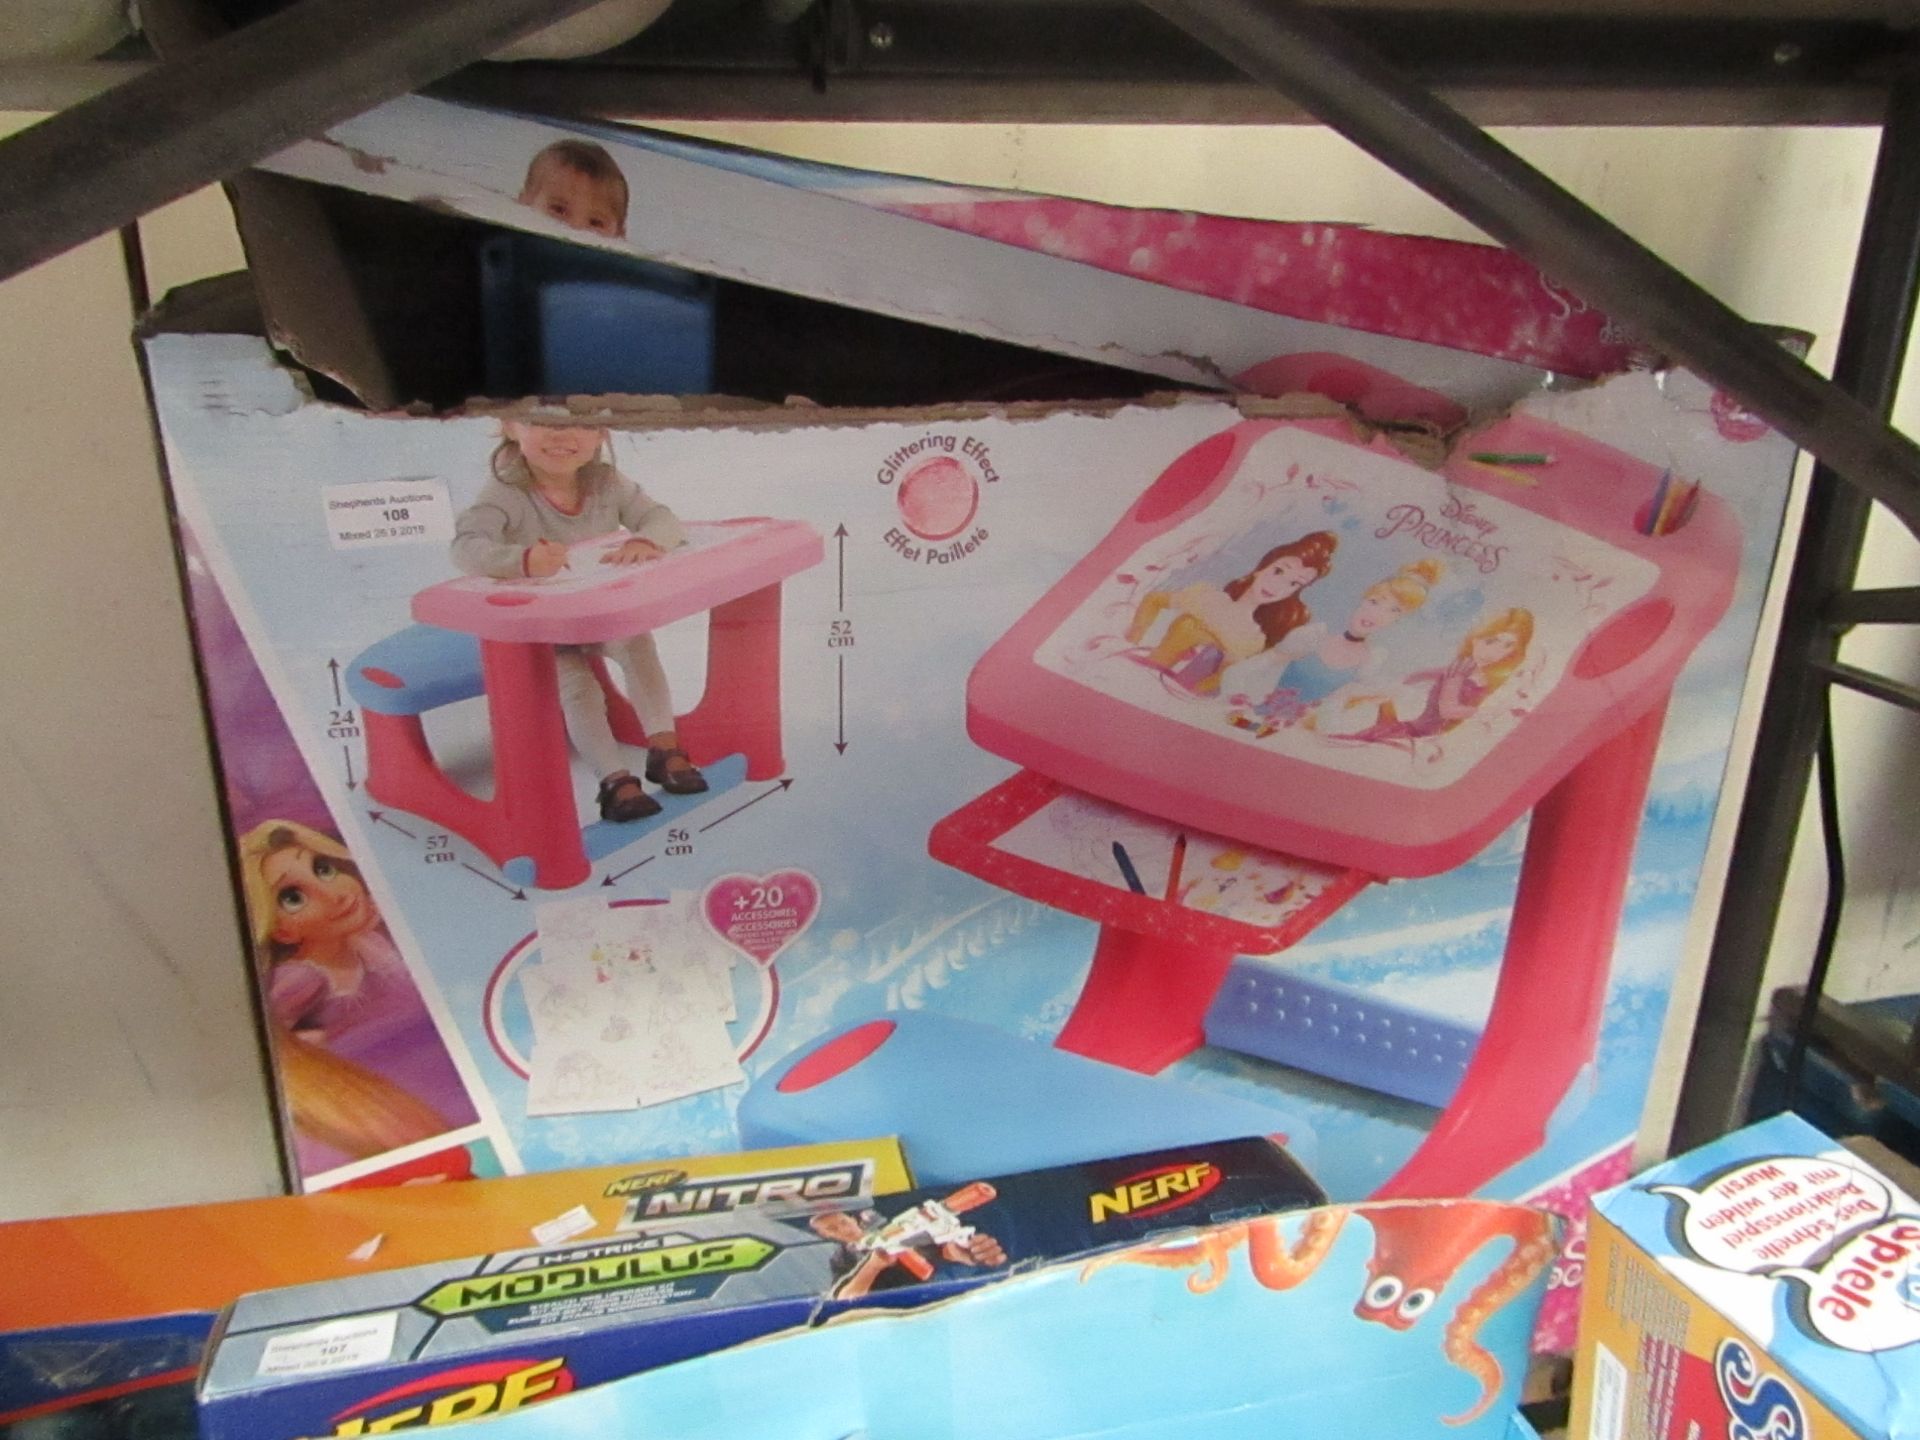 Disney Princess activity table, unchecked and boxed.